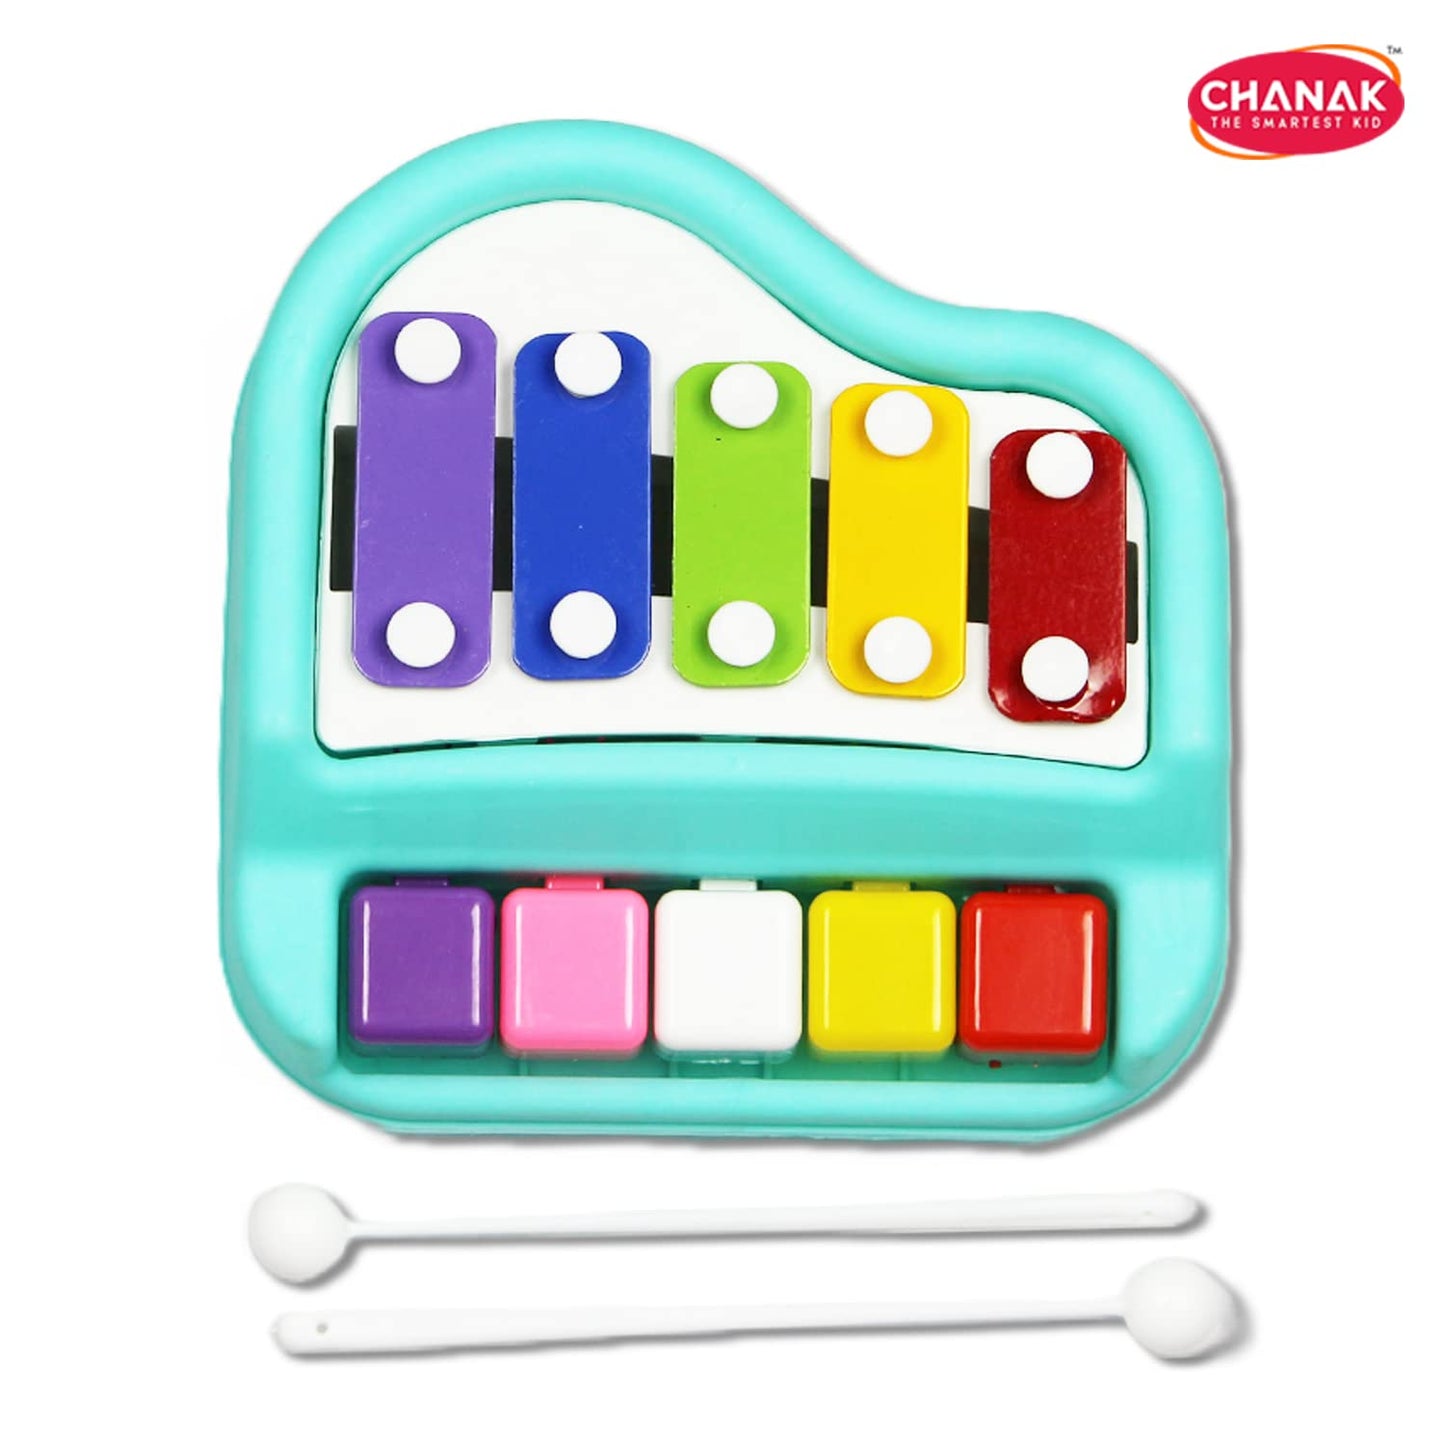 Chanak Musical Xylophone Piano Toy for Kids (Blue)